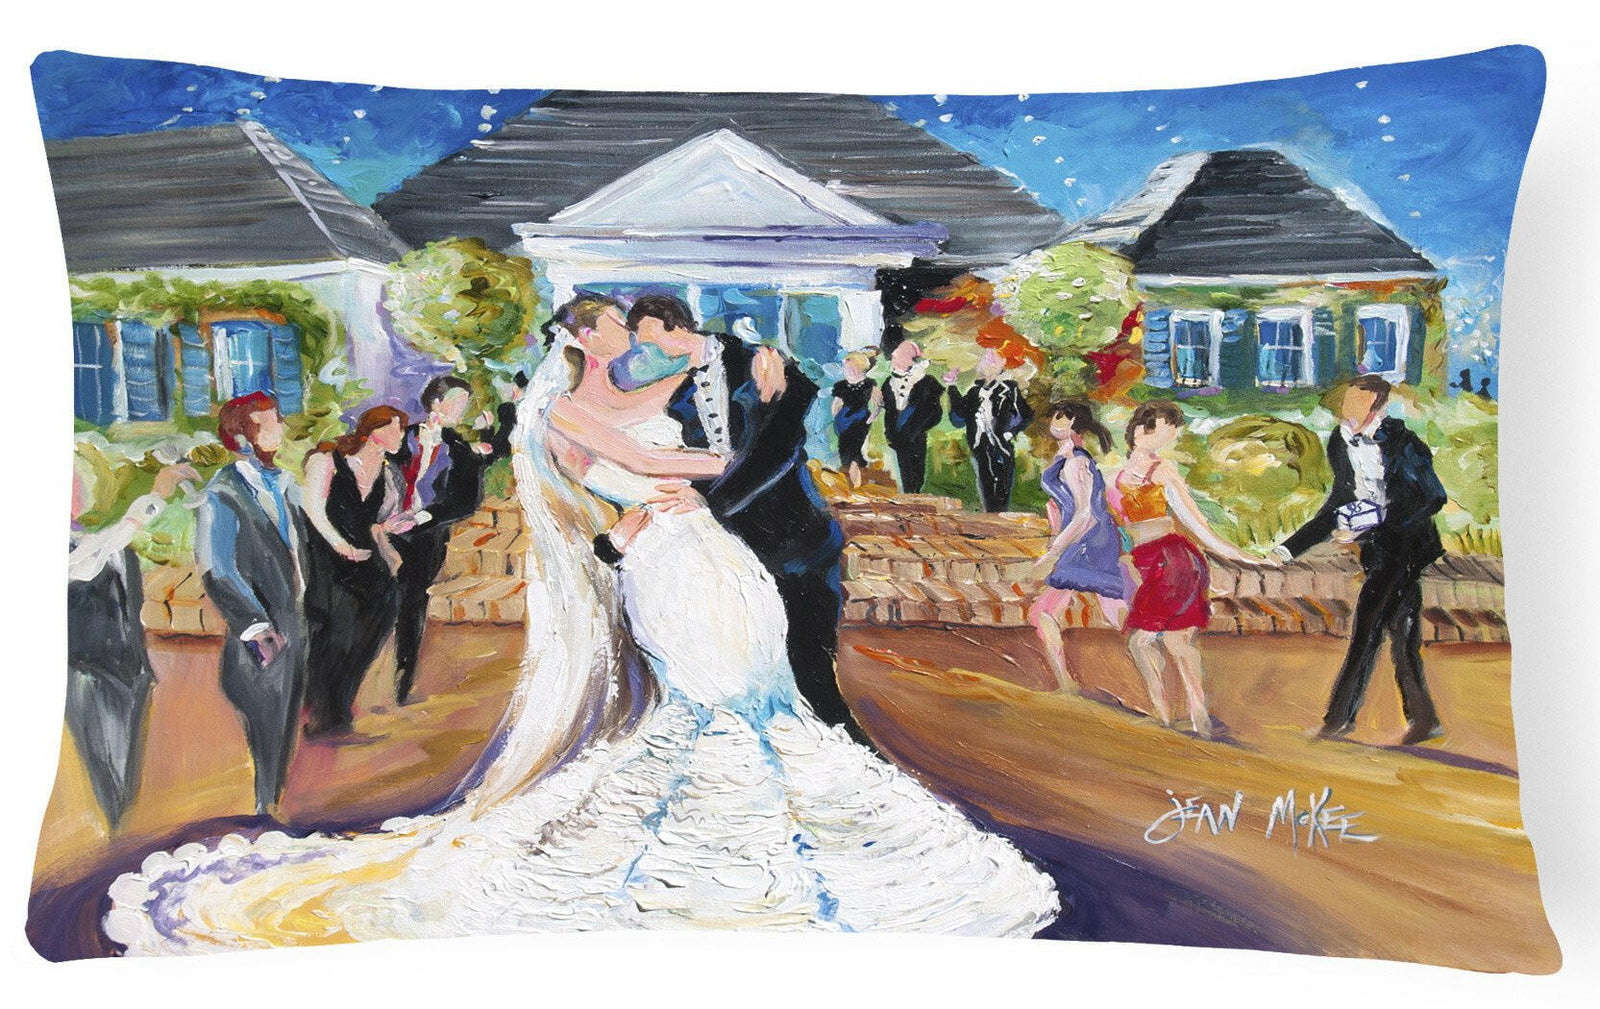 Our Wedding Day Canvas Fabric Decorative Pillow JMK1127PW1216 by Caroline's Treasures